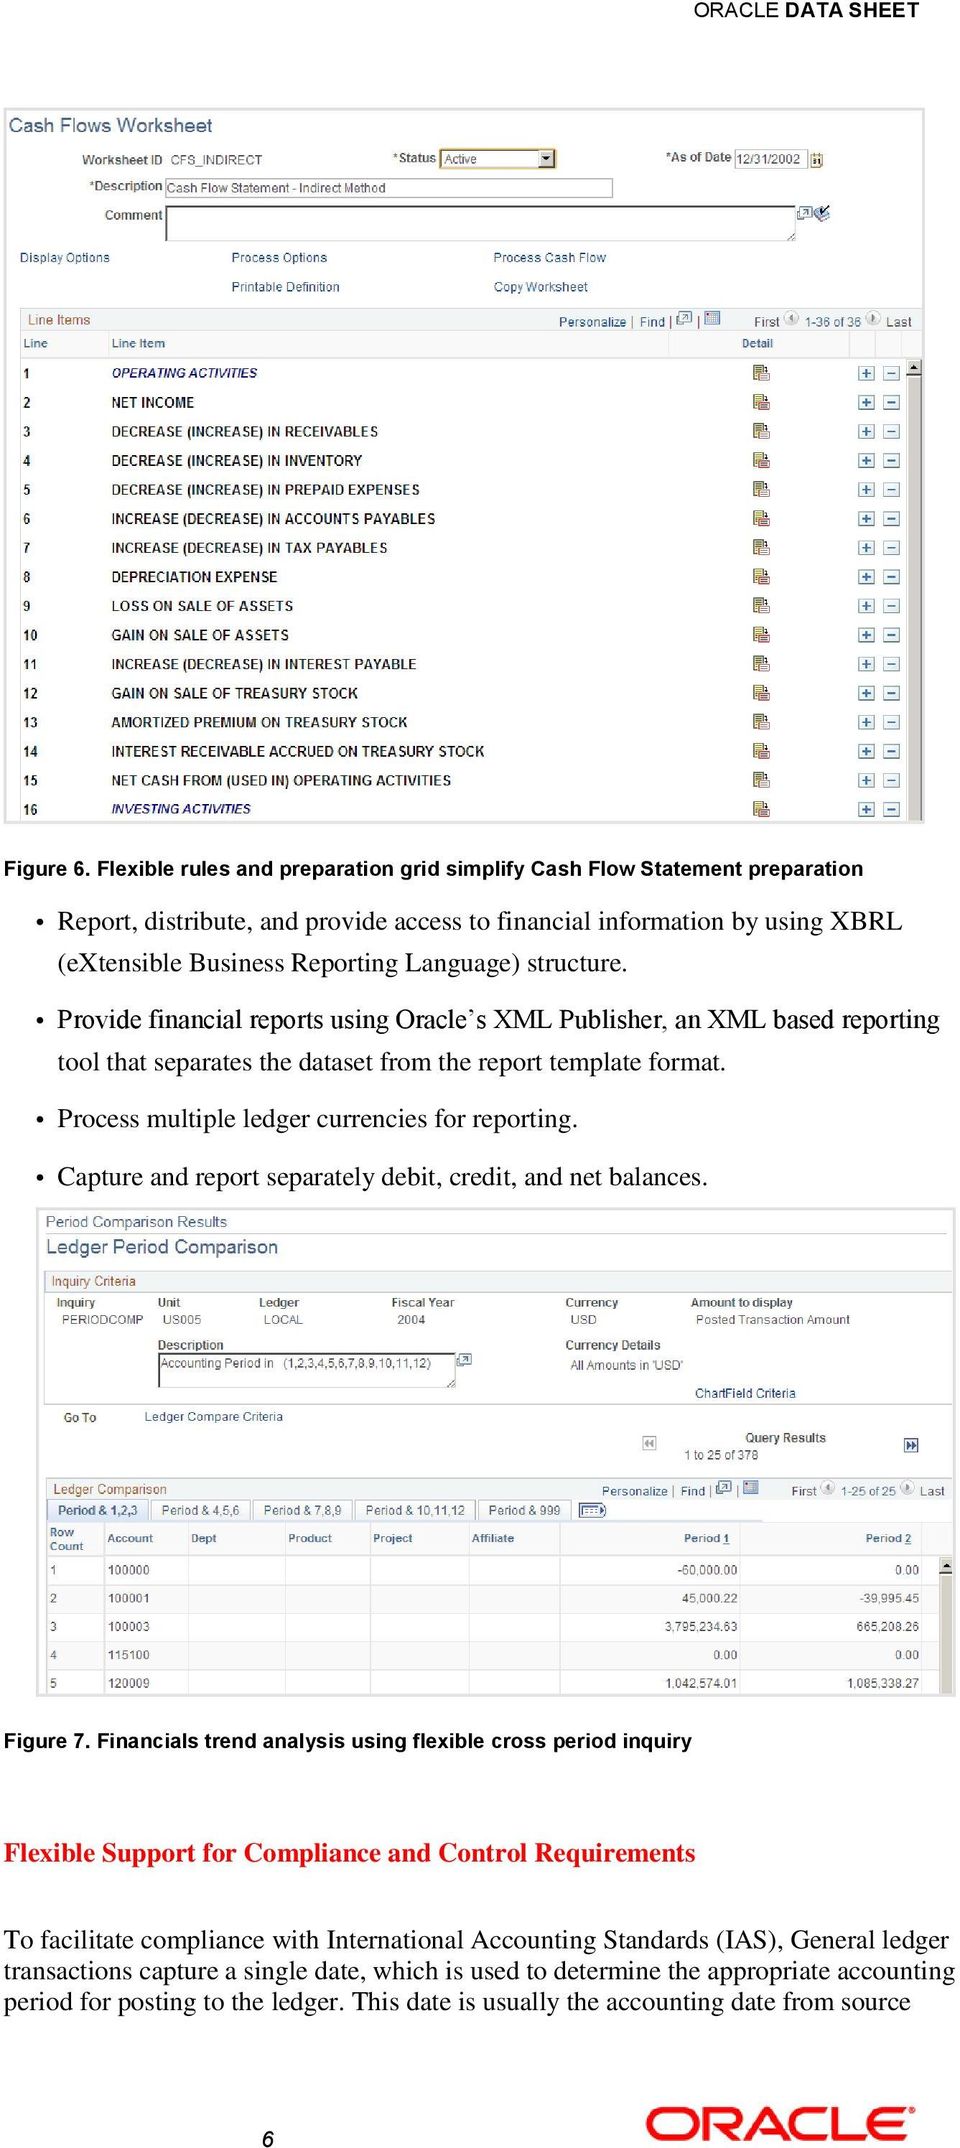 structure. Provide financial reports using Oracle s XML Publisher, an XML based reporting tool that separates the dataset from the report template format.